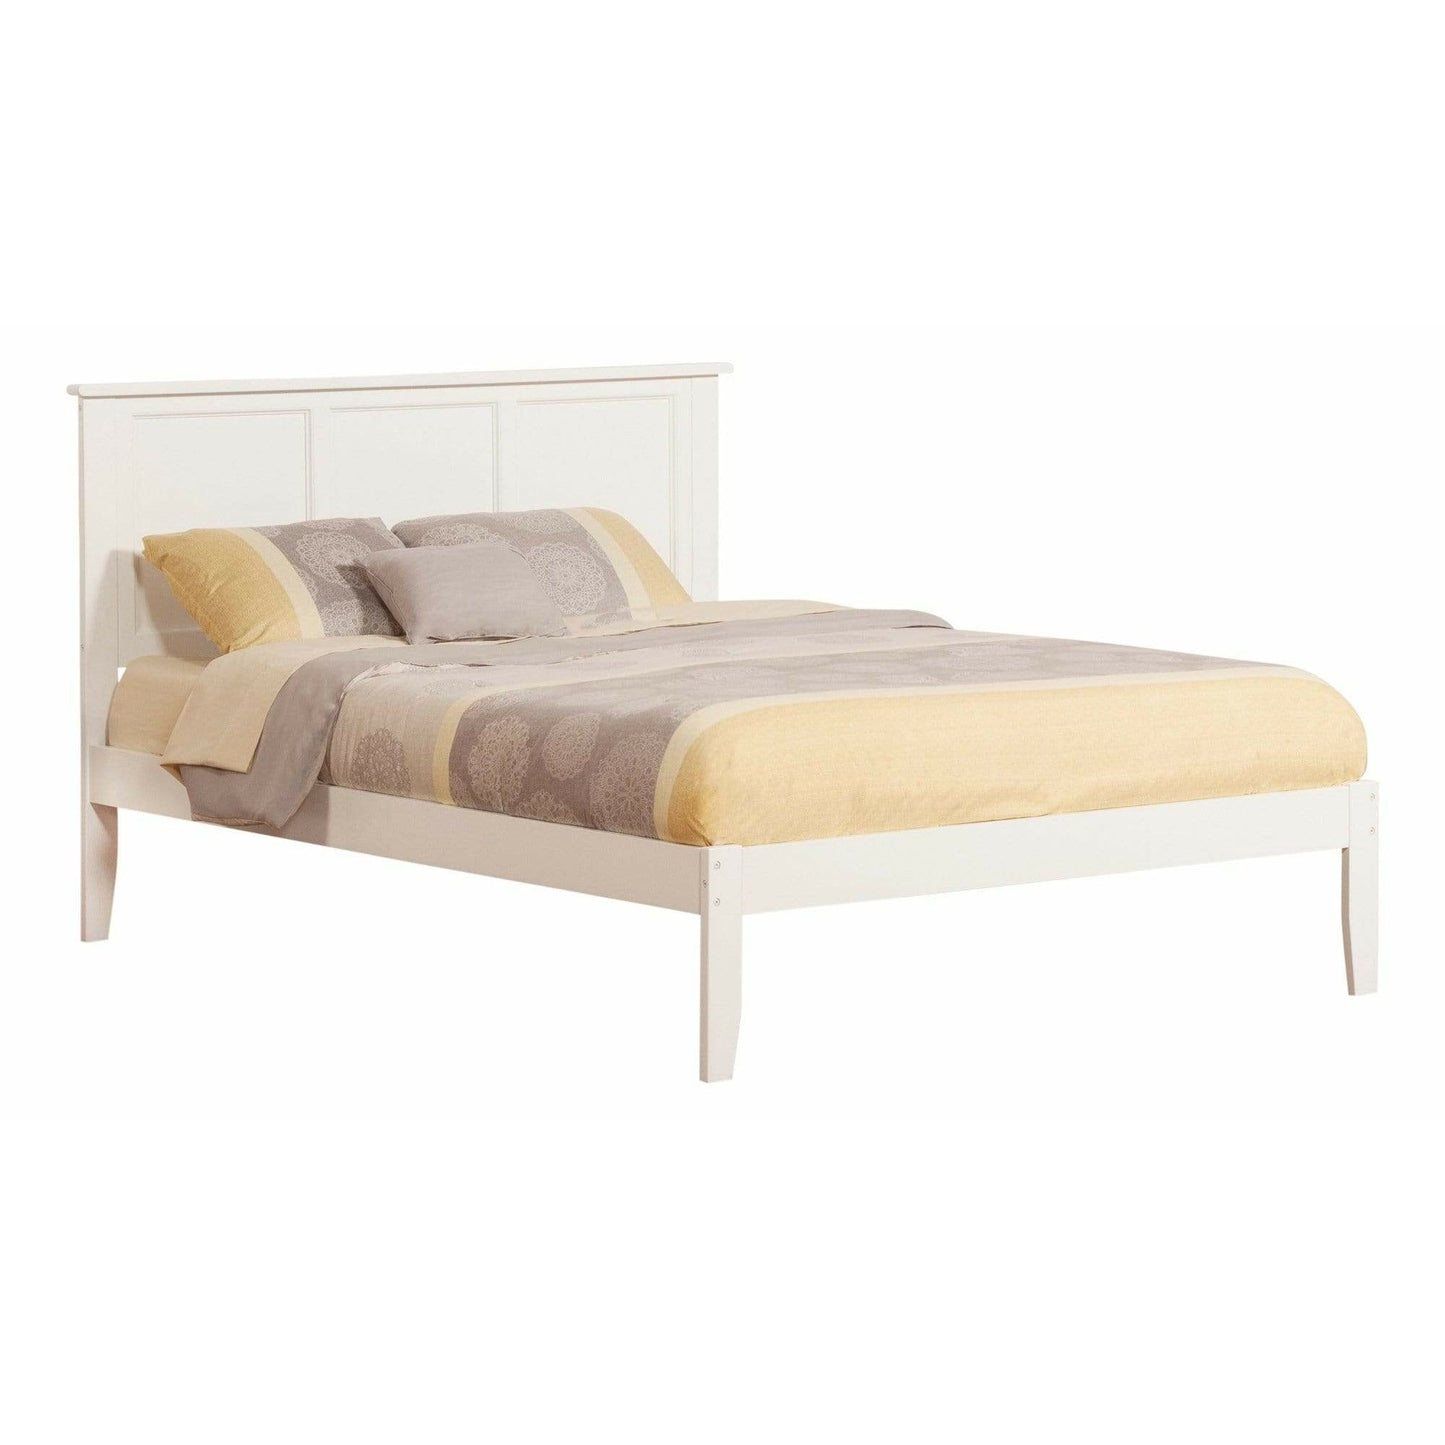 Atlantic Furniture Bed White Madison Queen Platform Bed with Open Foot Board in Espresso